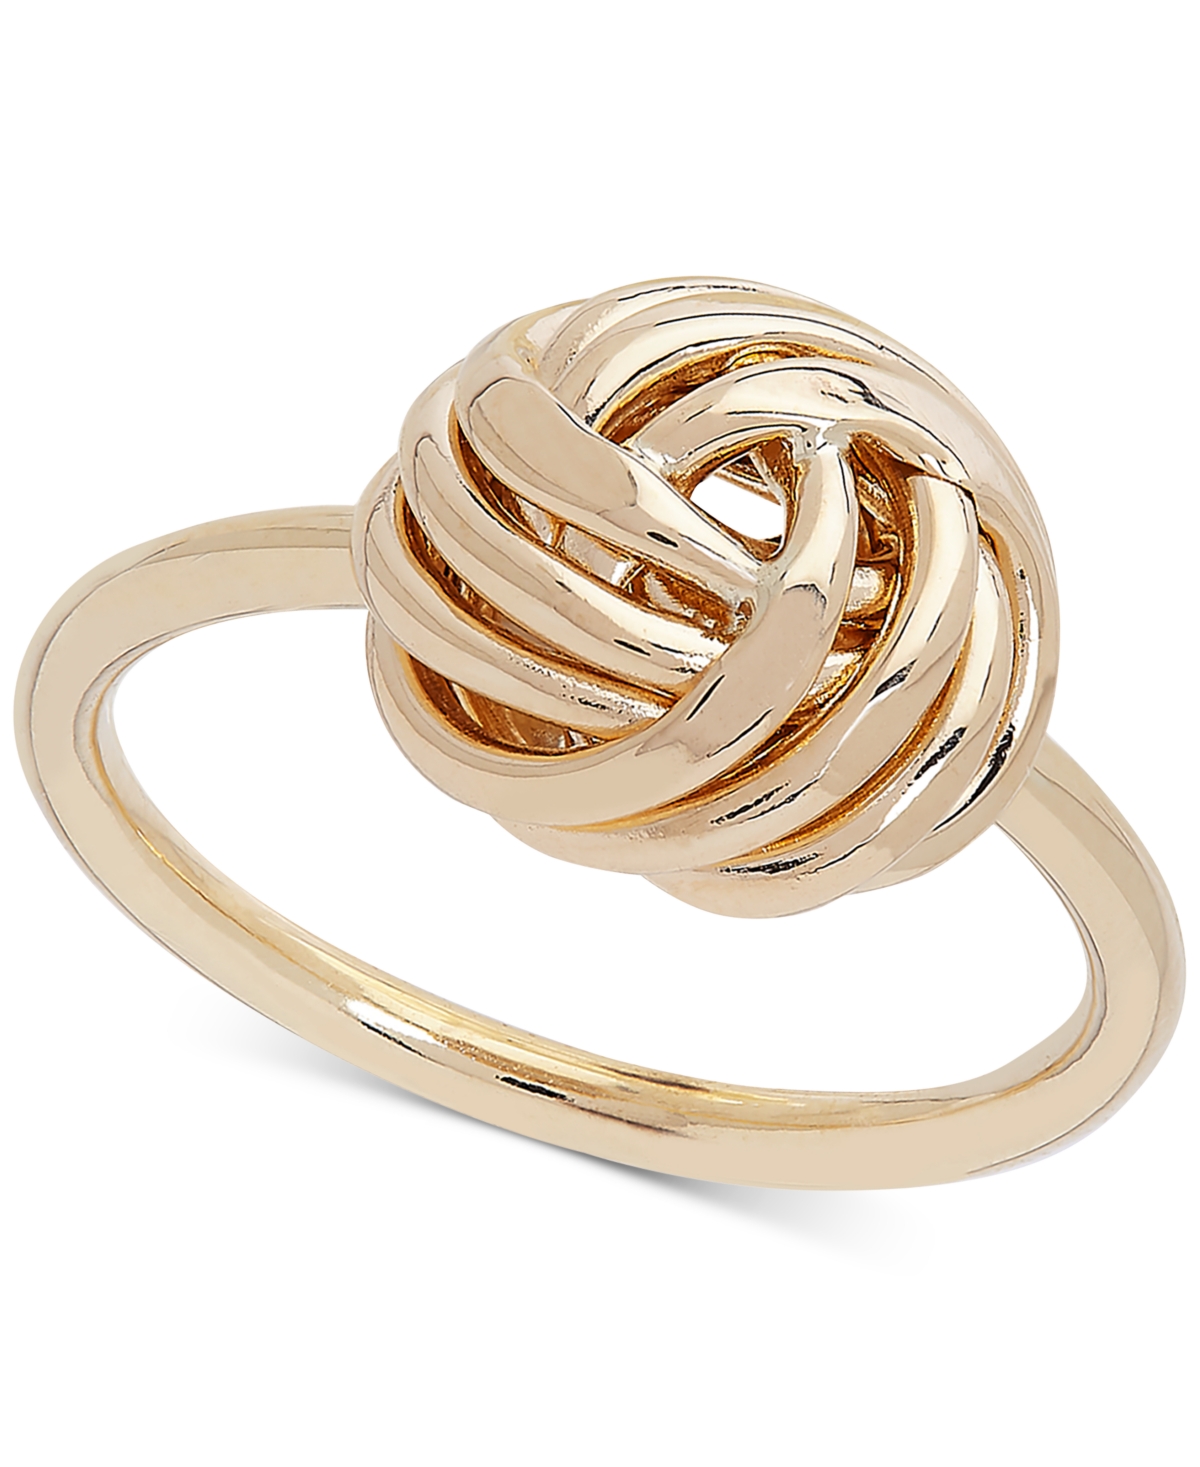 Italian Gold Love Knot Ring in 14k Gold & Reviews - Rings - Jewelry &  Watches - Macy's